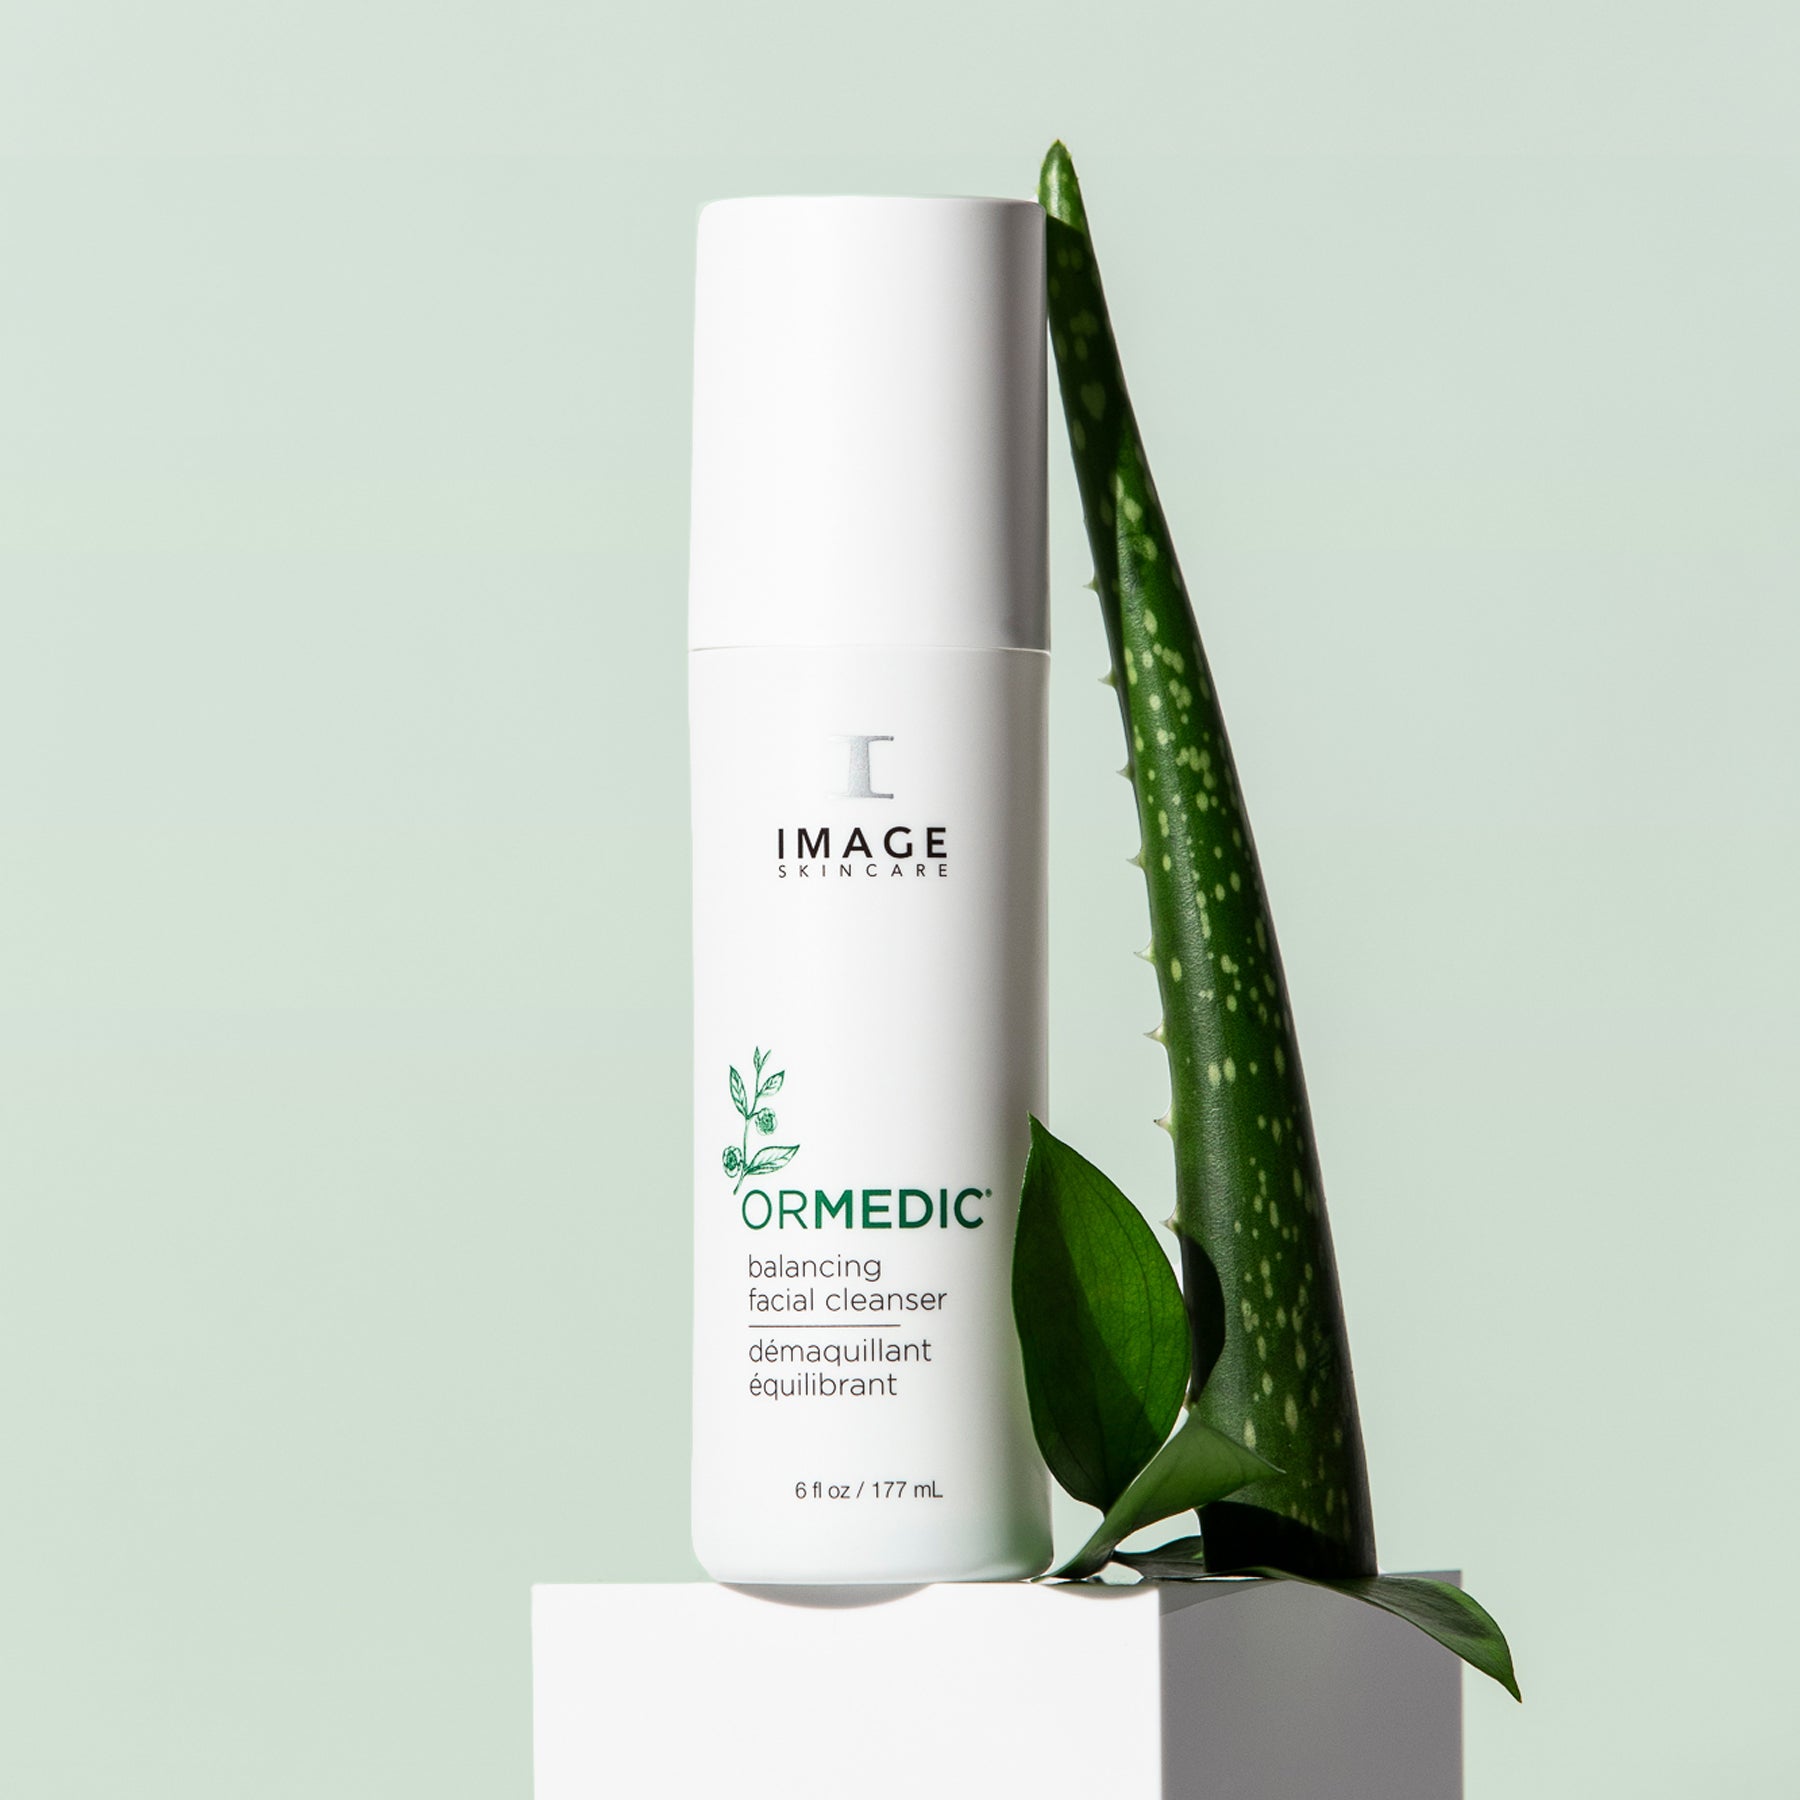 Image Ormedic Facial Cleanser